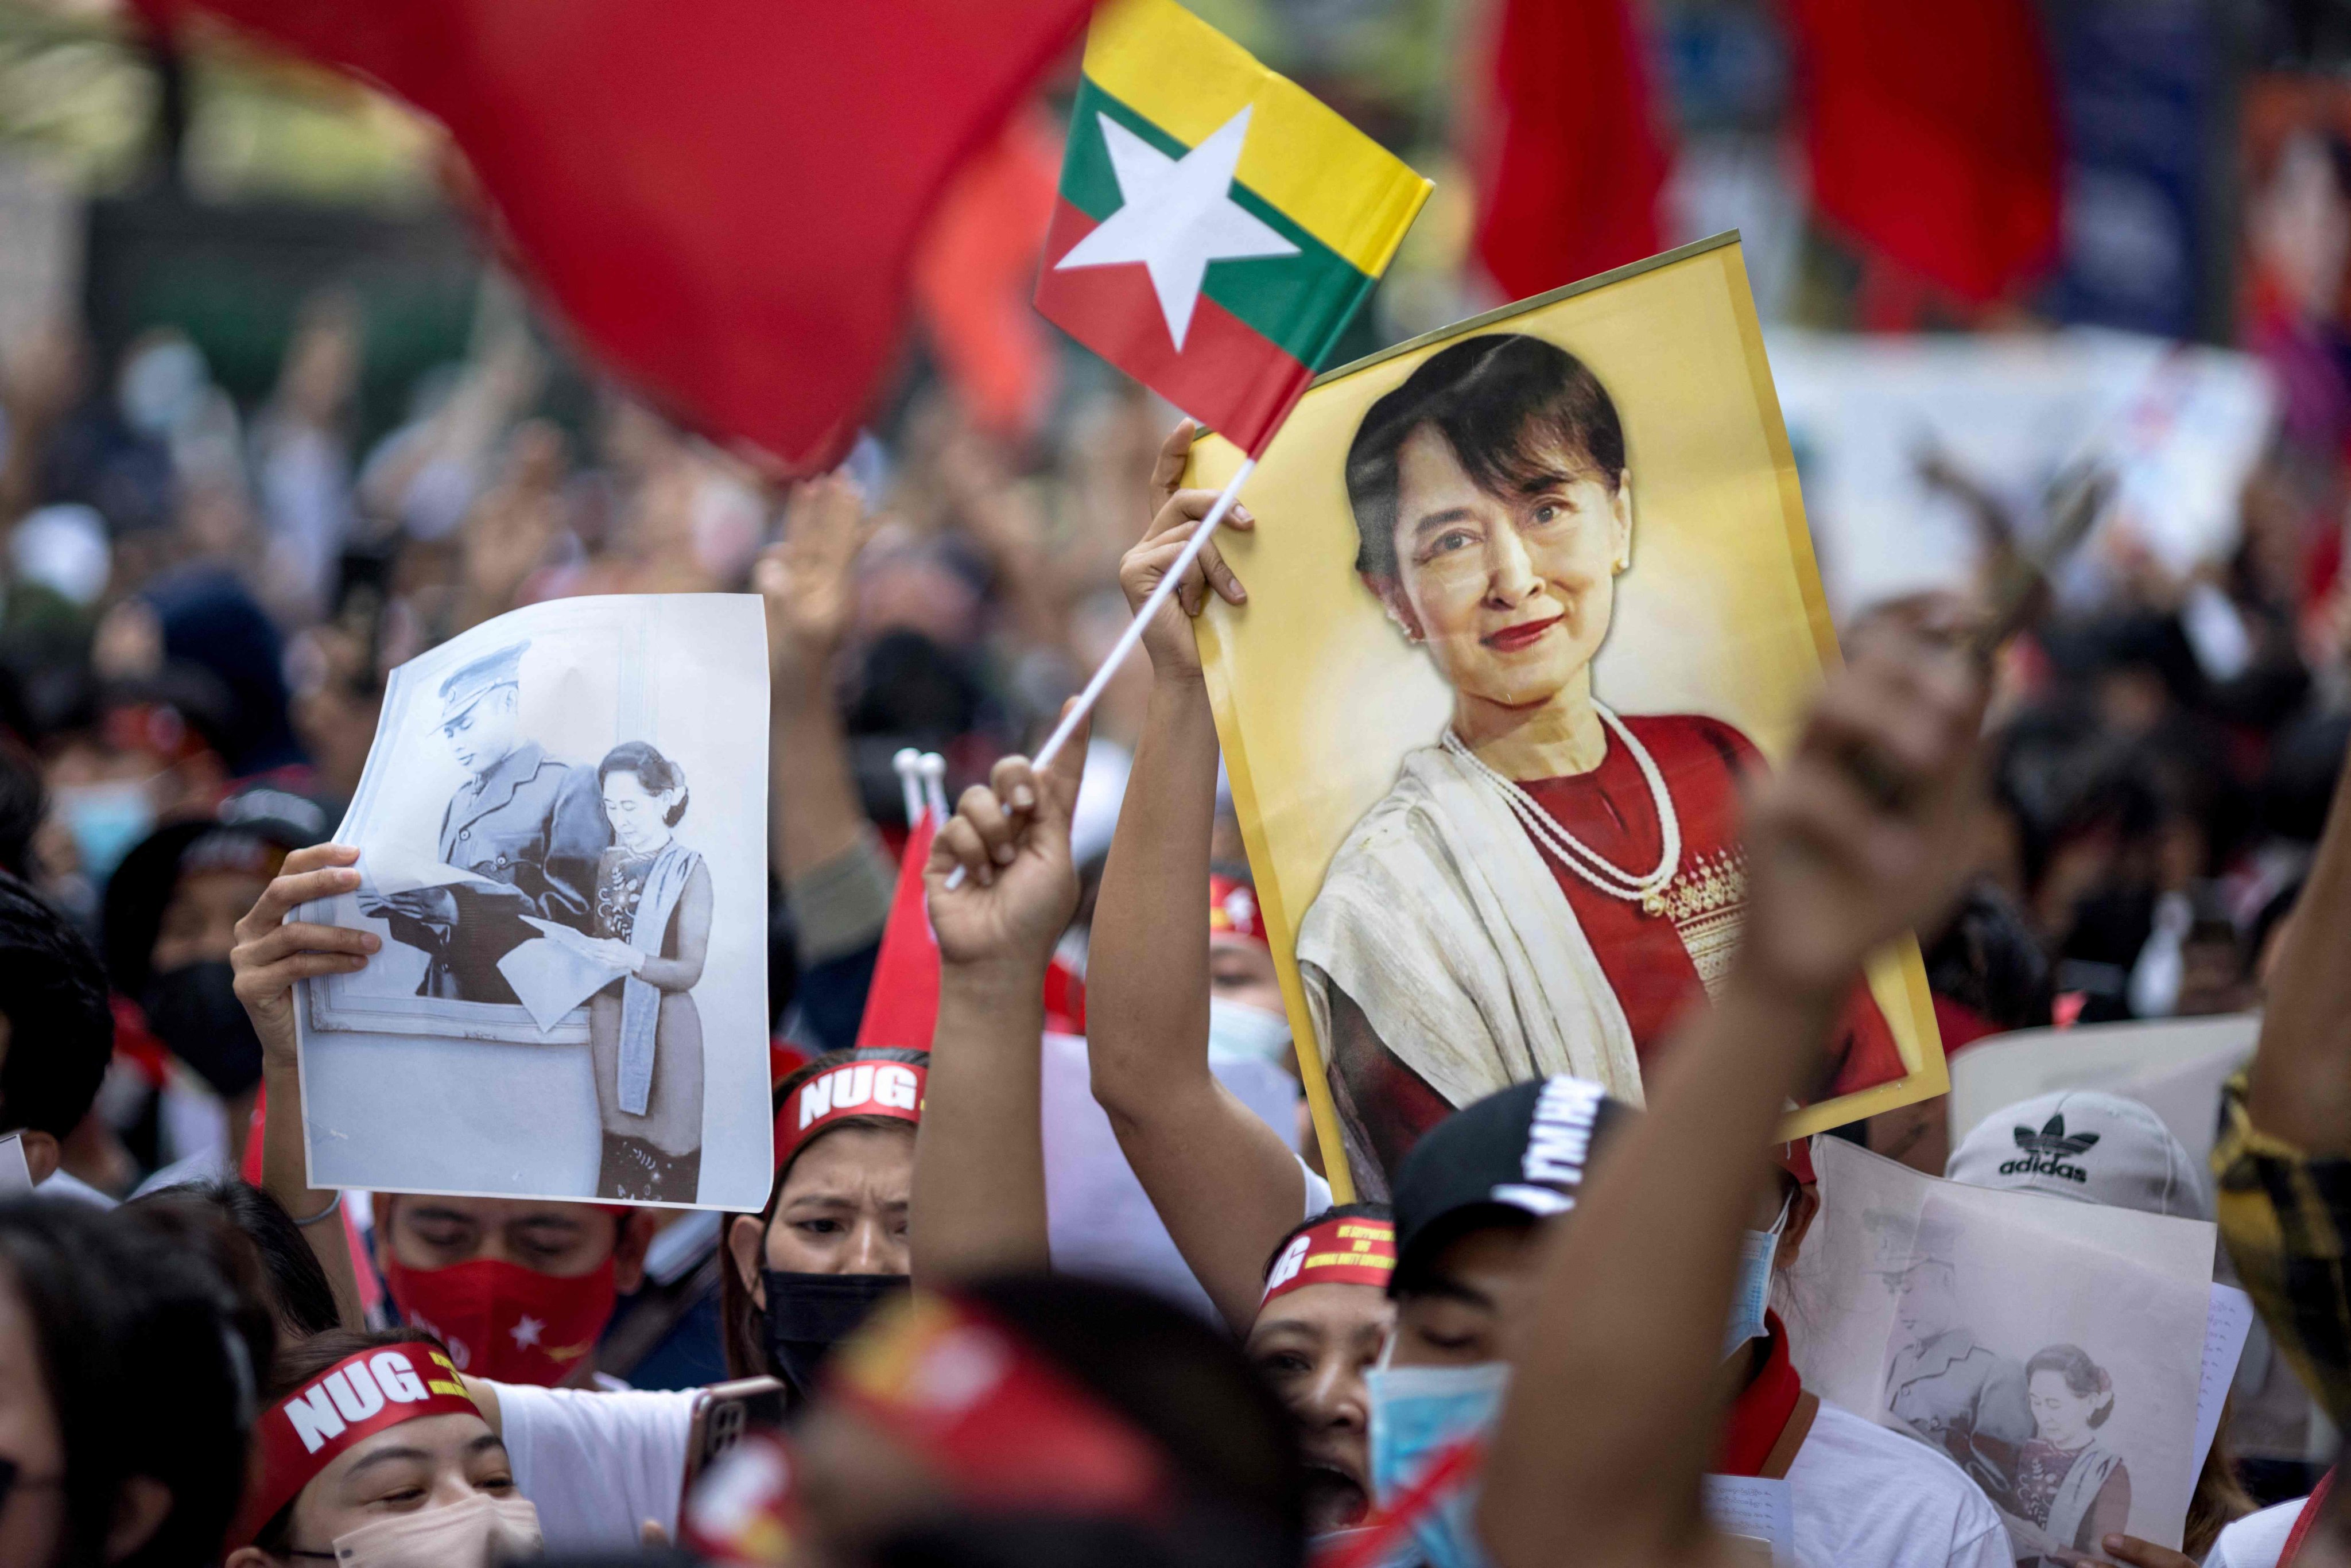 Protesters hold images of detained civilian leader Aung San Suu Kyi and a flag of Myanmar during a demonstration in Bangkok on February 1 to mark the second anniversary of the coup. Photo: AFP